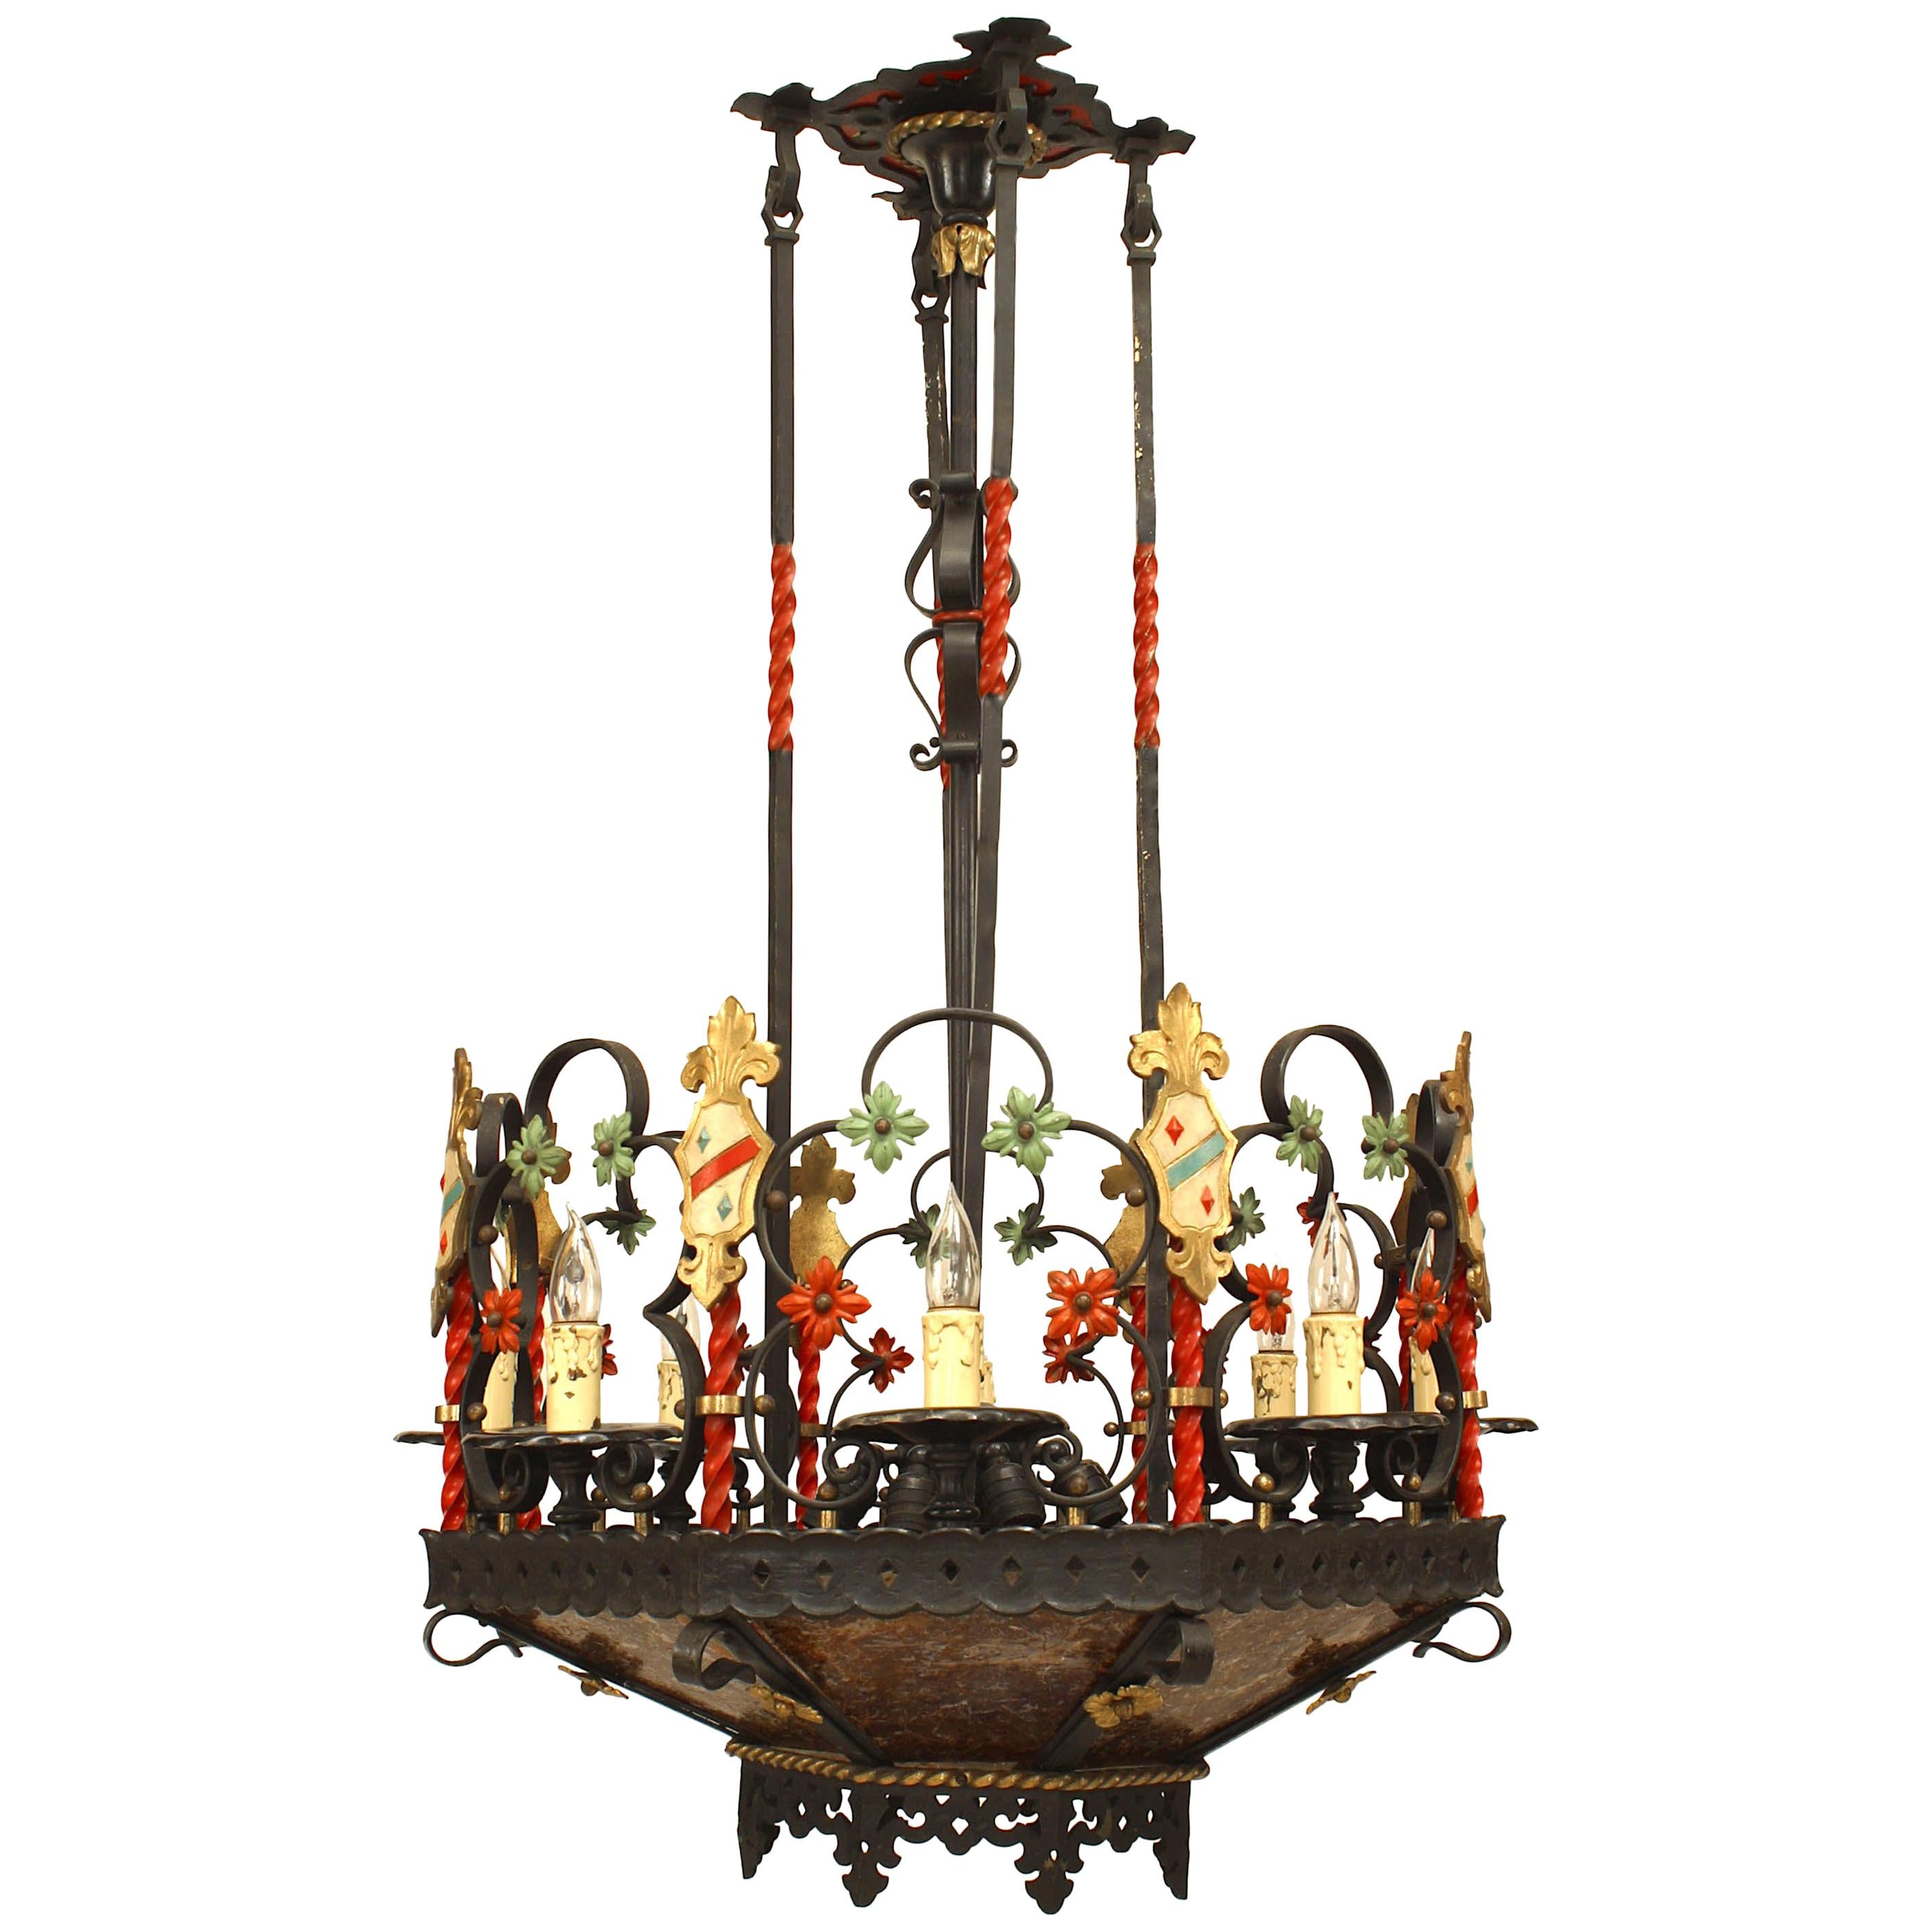 English Gothic Revival Style Wrought Iron Painted Shield Chandelier